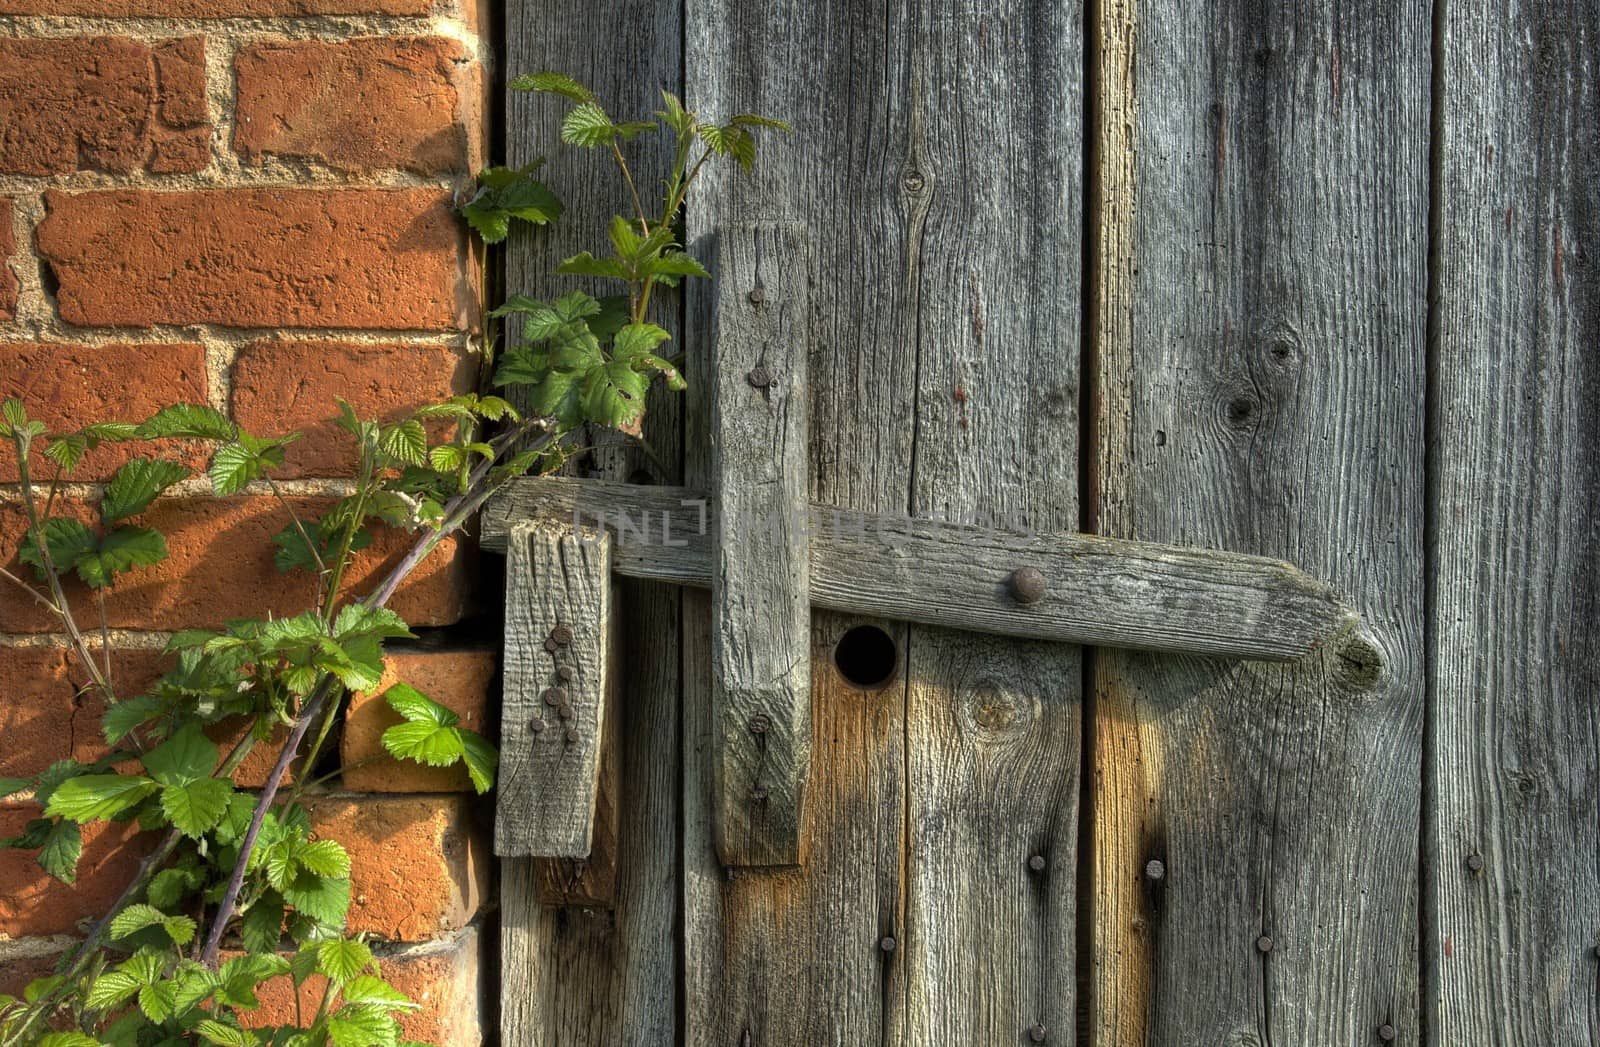 Old barn door with wooden latch, Worcestershire, England.